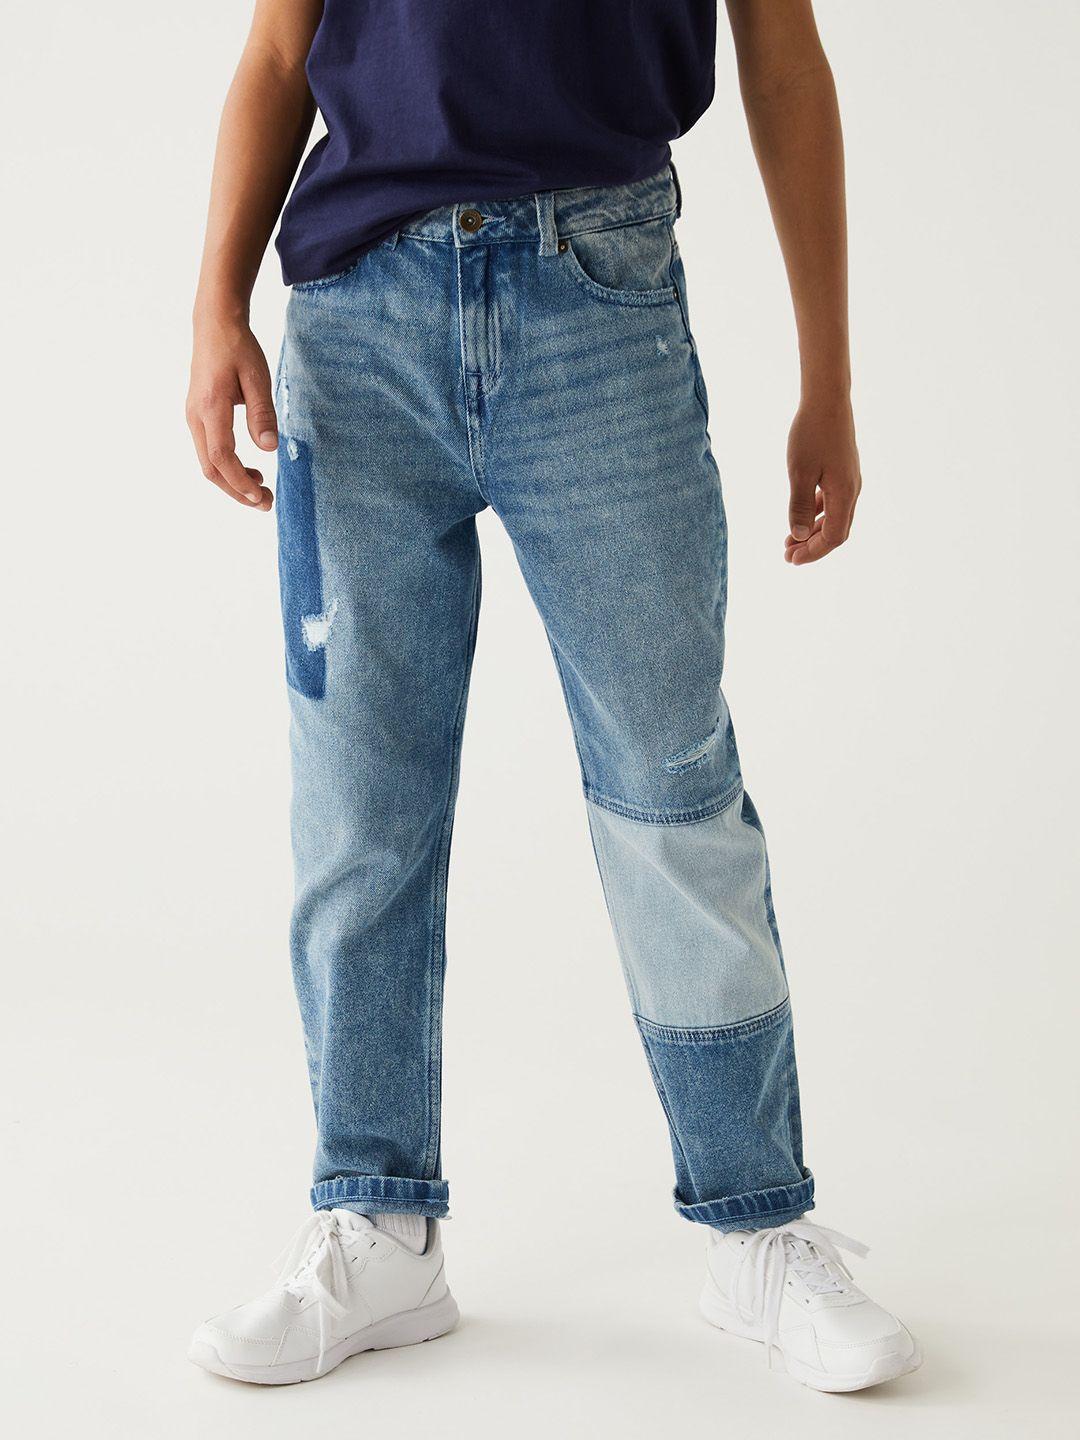 marks & spencer boys cotton high-rise mildly distressed light fade jeans